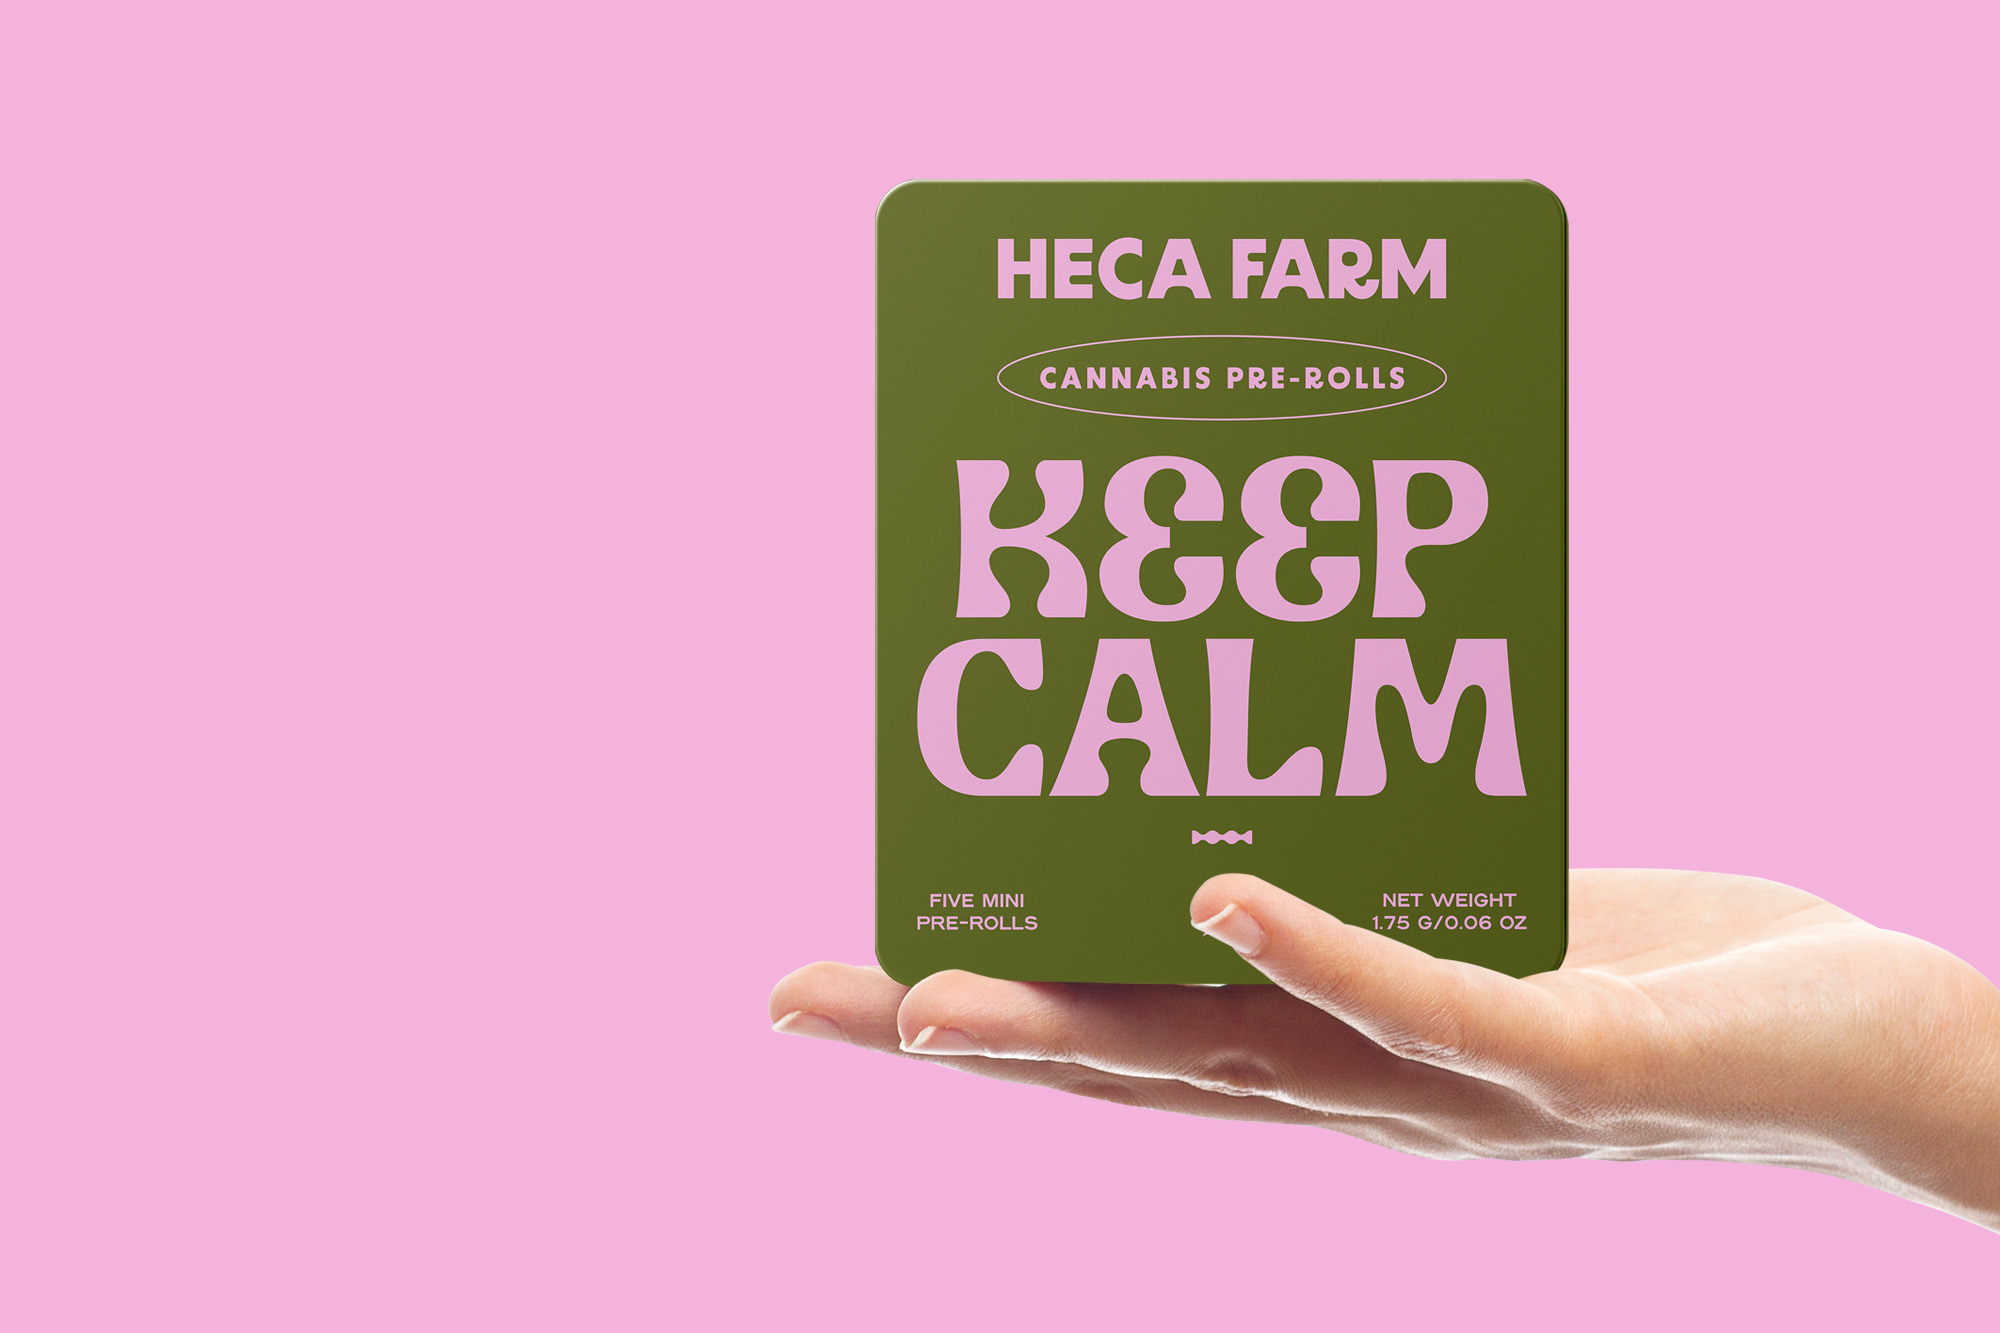 Fun to have Cannabis Packaging Design for Heca Farm by Widarto